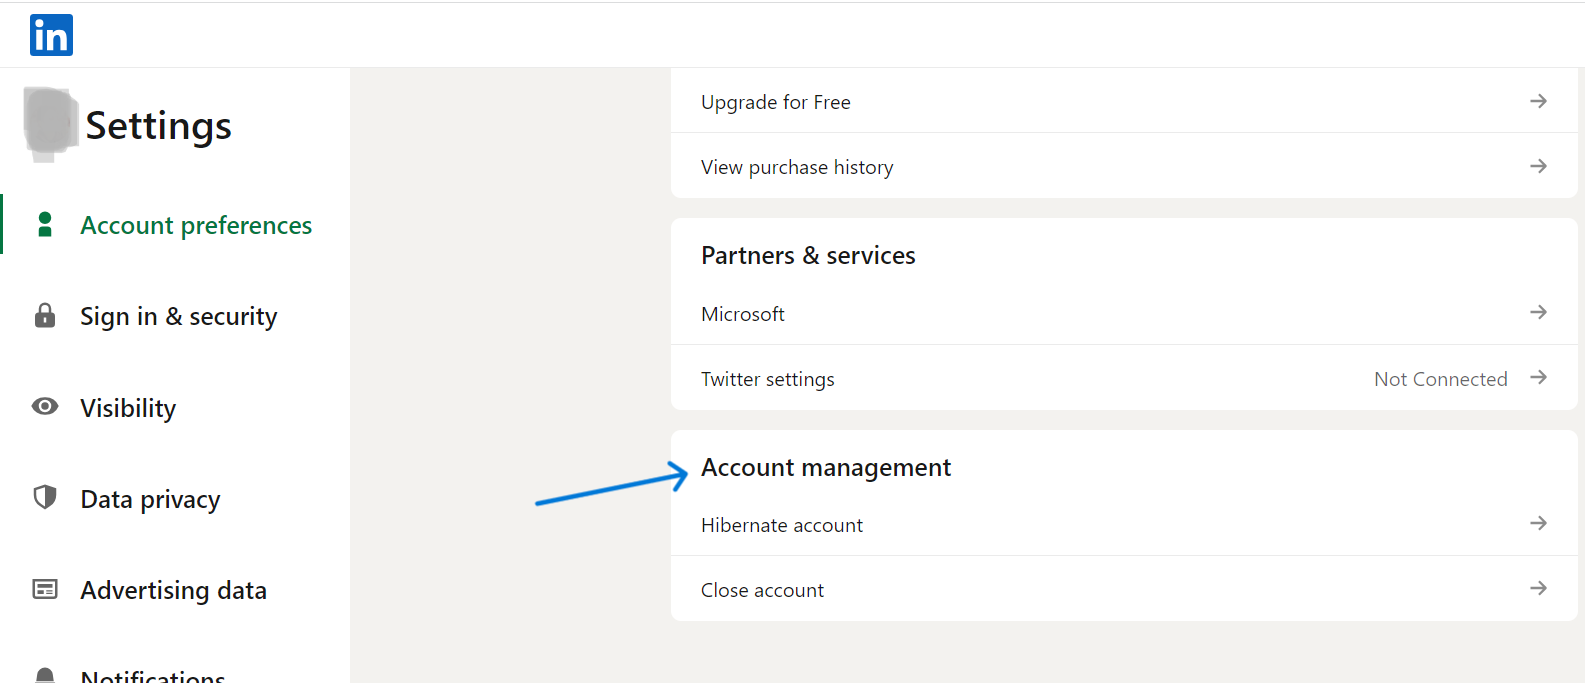 Account preferences